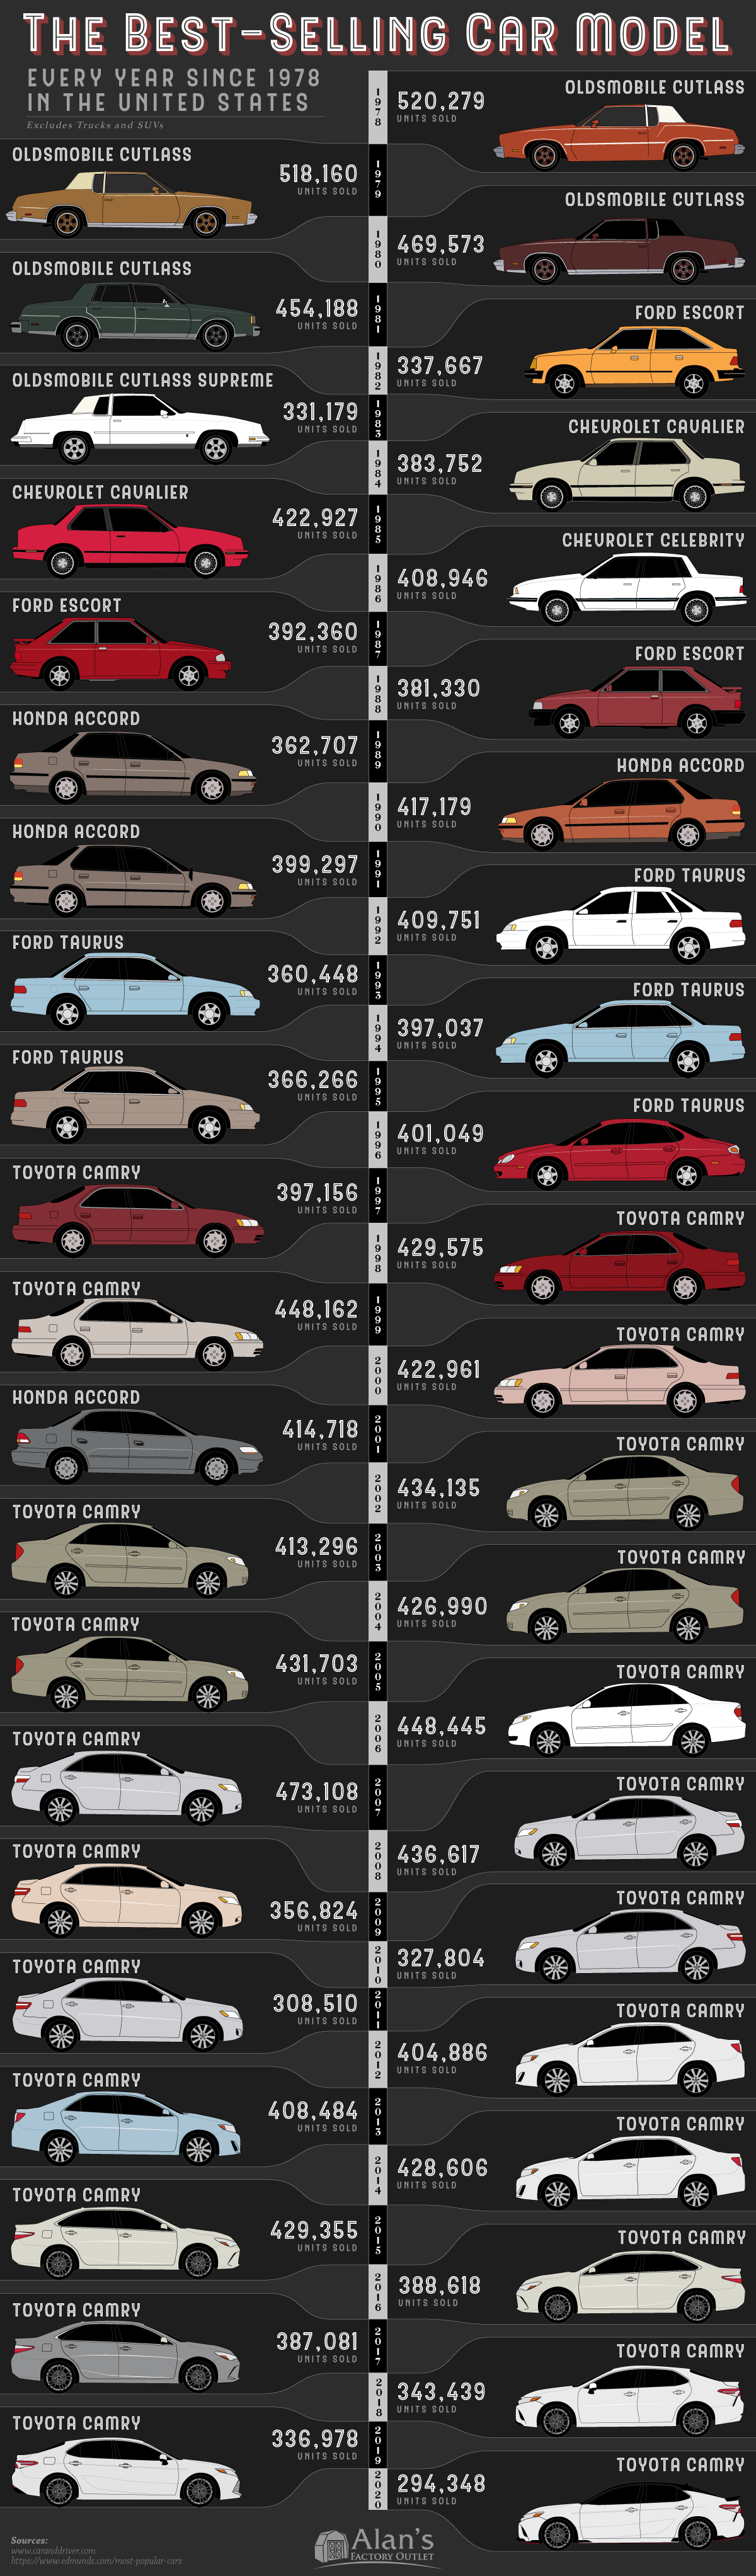 The Best-Selling Car in America, Every Year Since 1978 - The Sounding Line